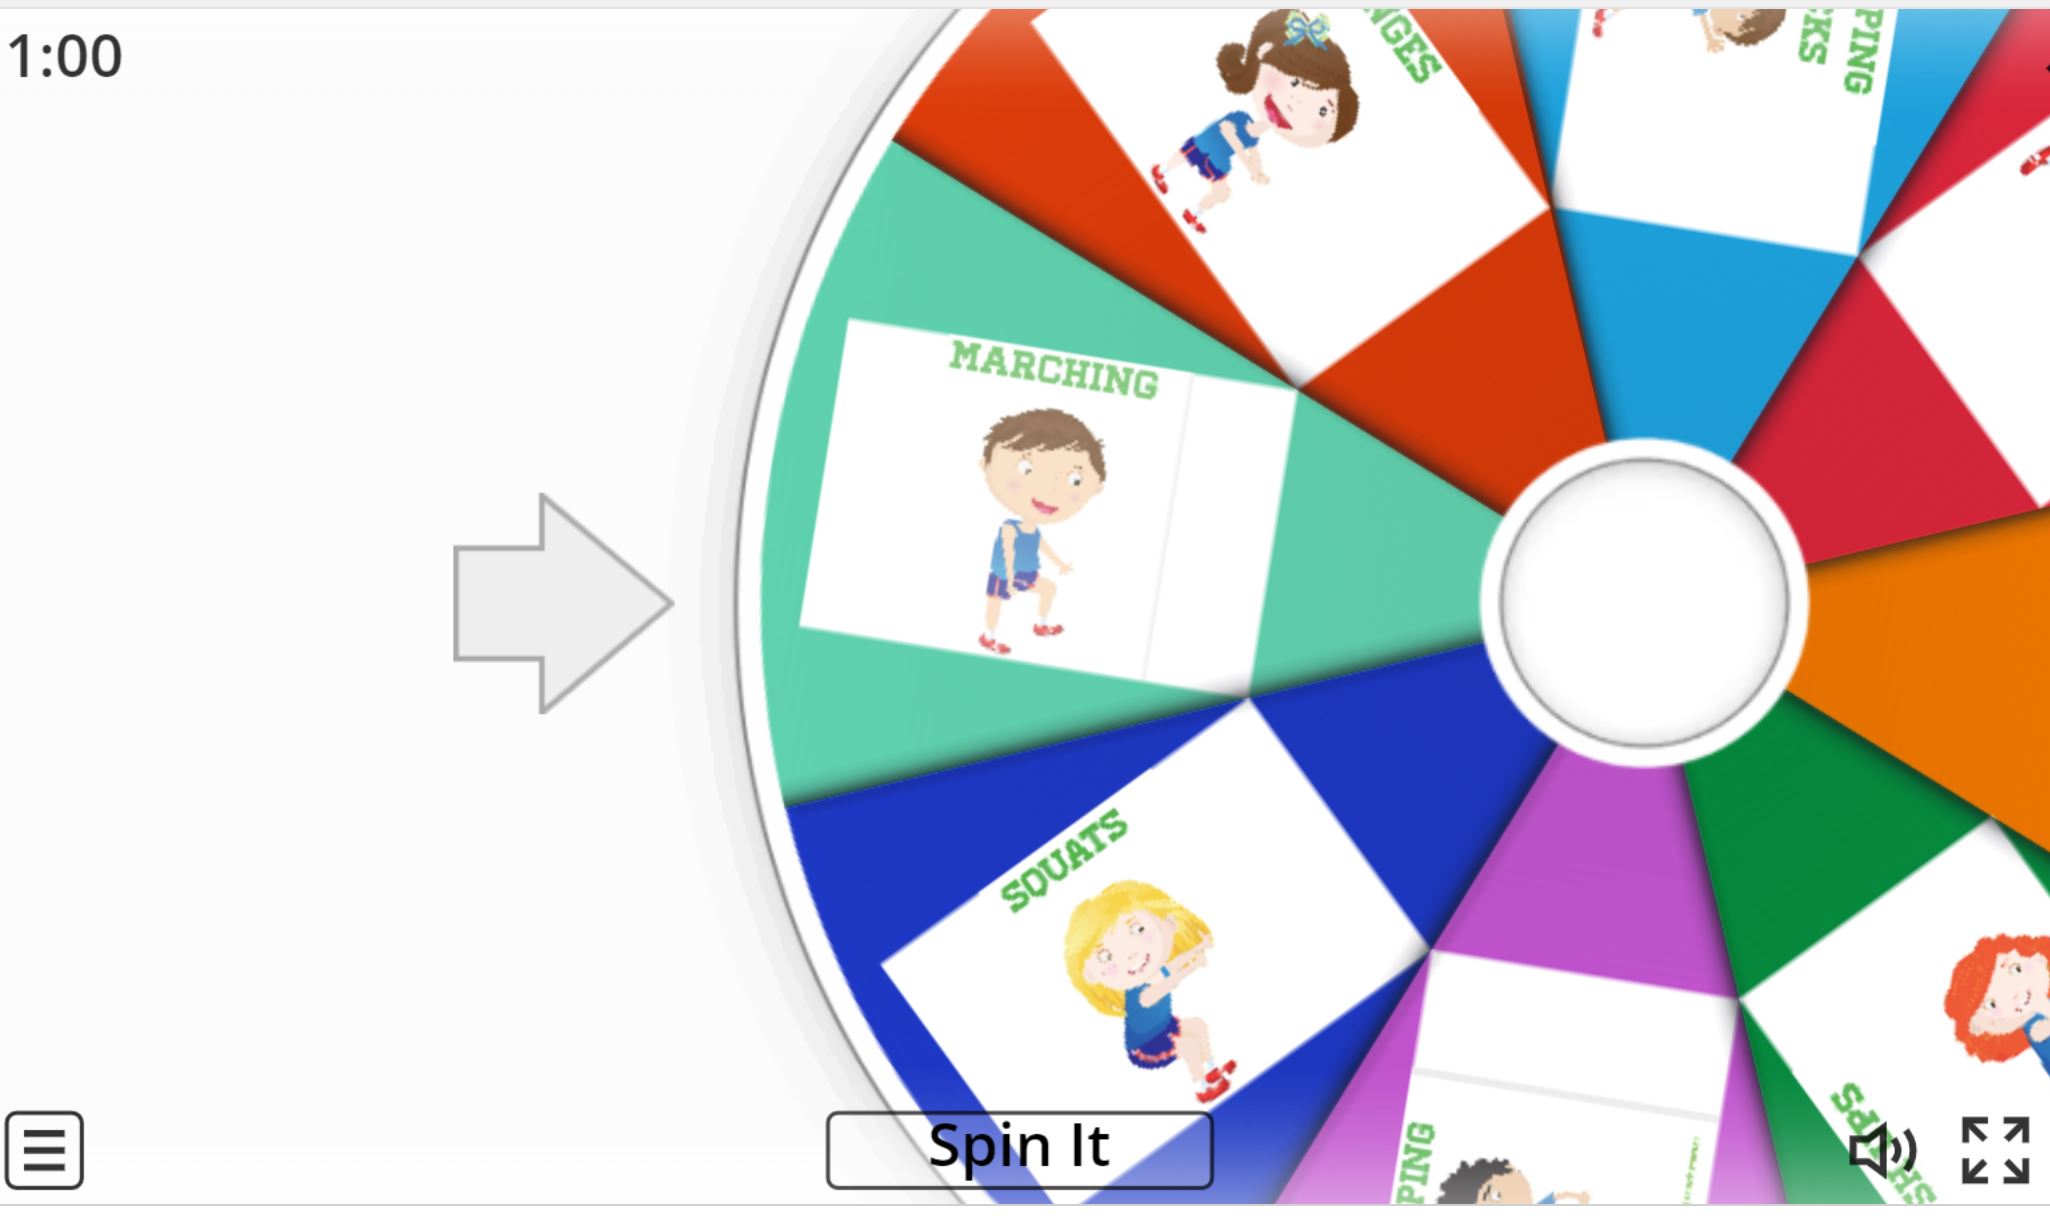 Colorful online movement break spinner with different exercises, as an example of educational brain breaks